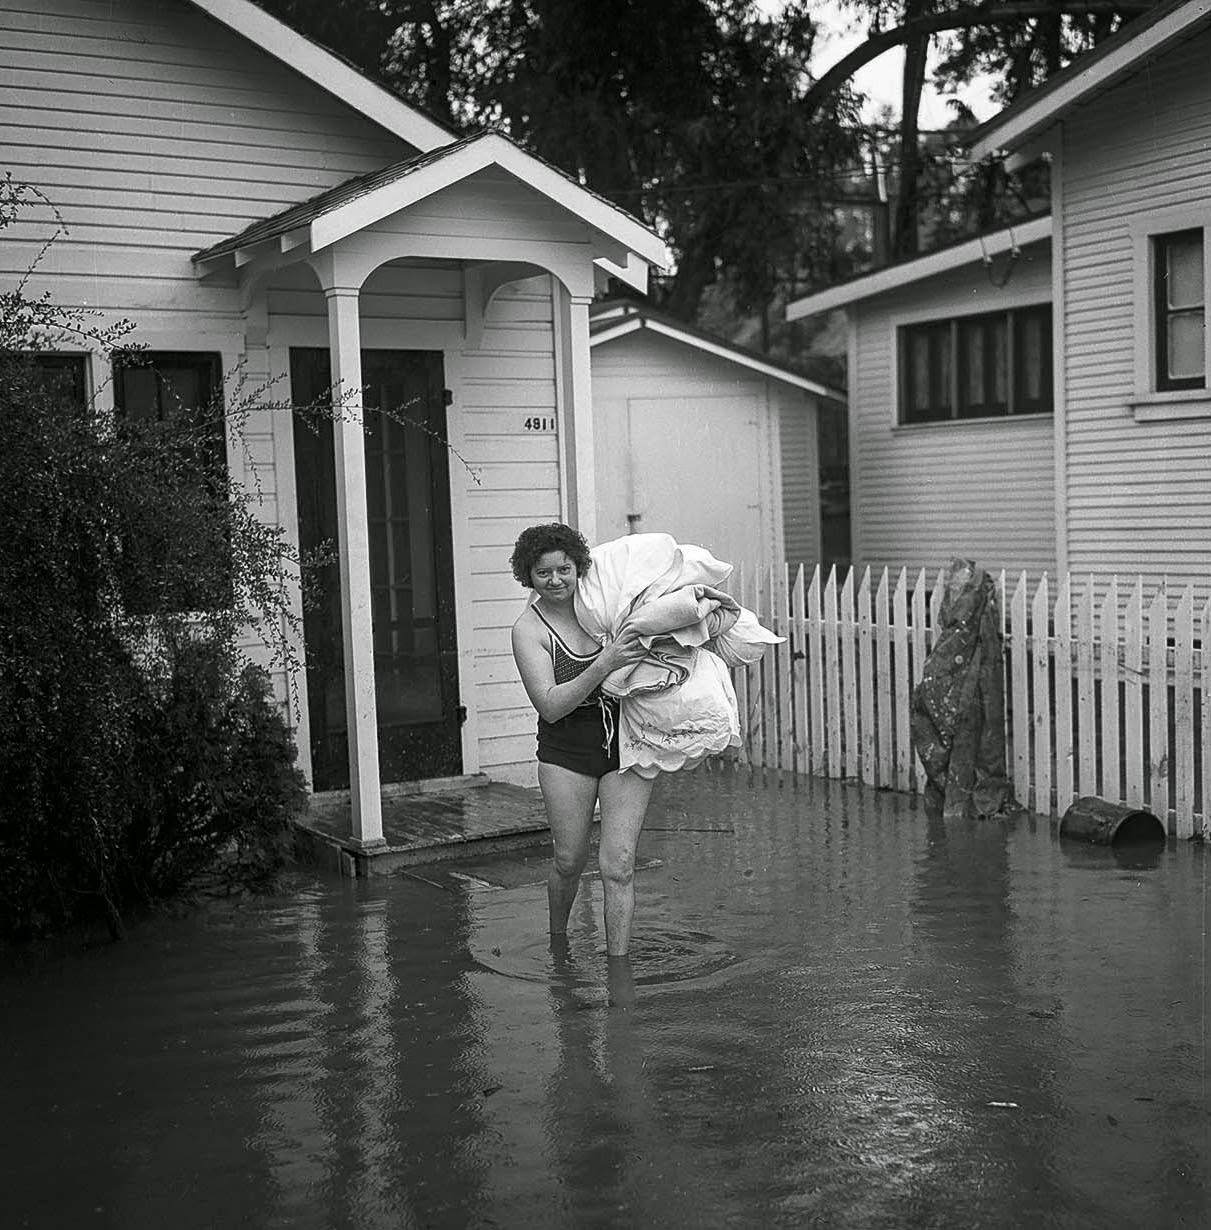 Mrs. L. Swink put on her swimsuit as she moved out after flooding, 1938